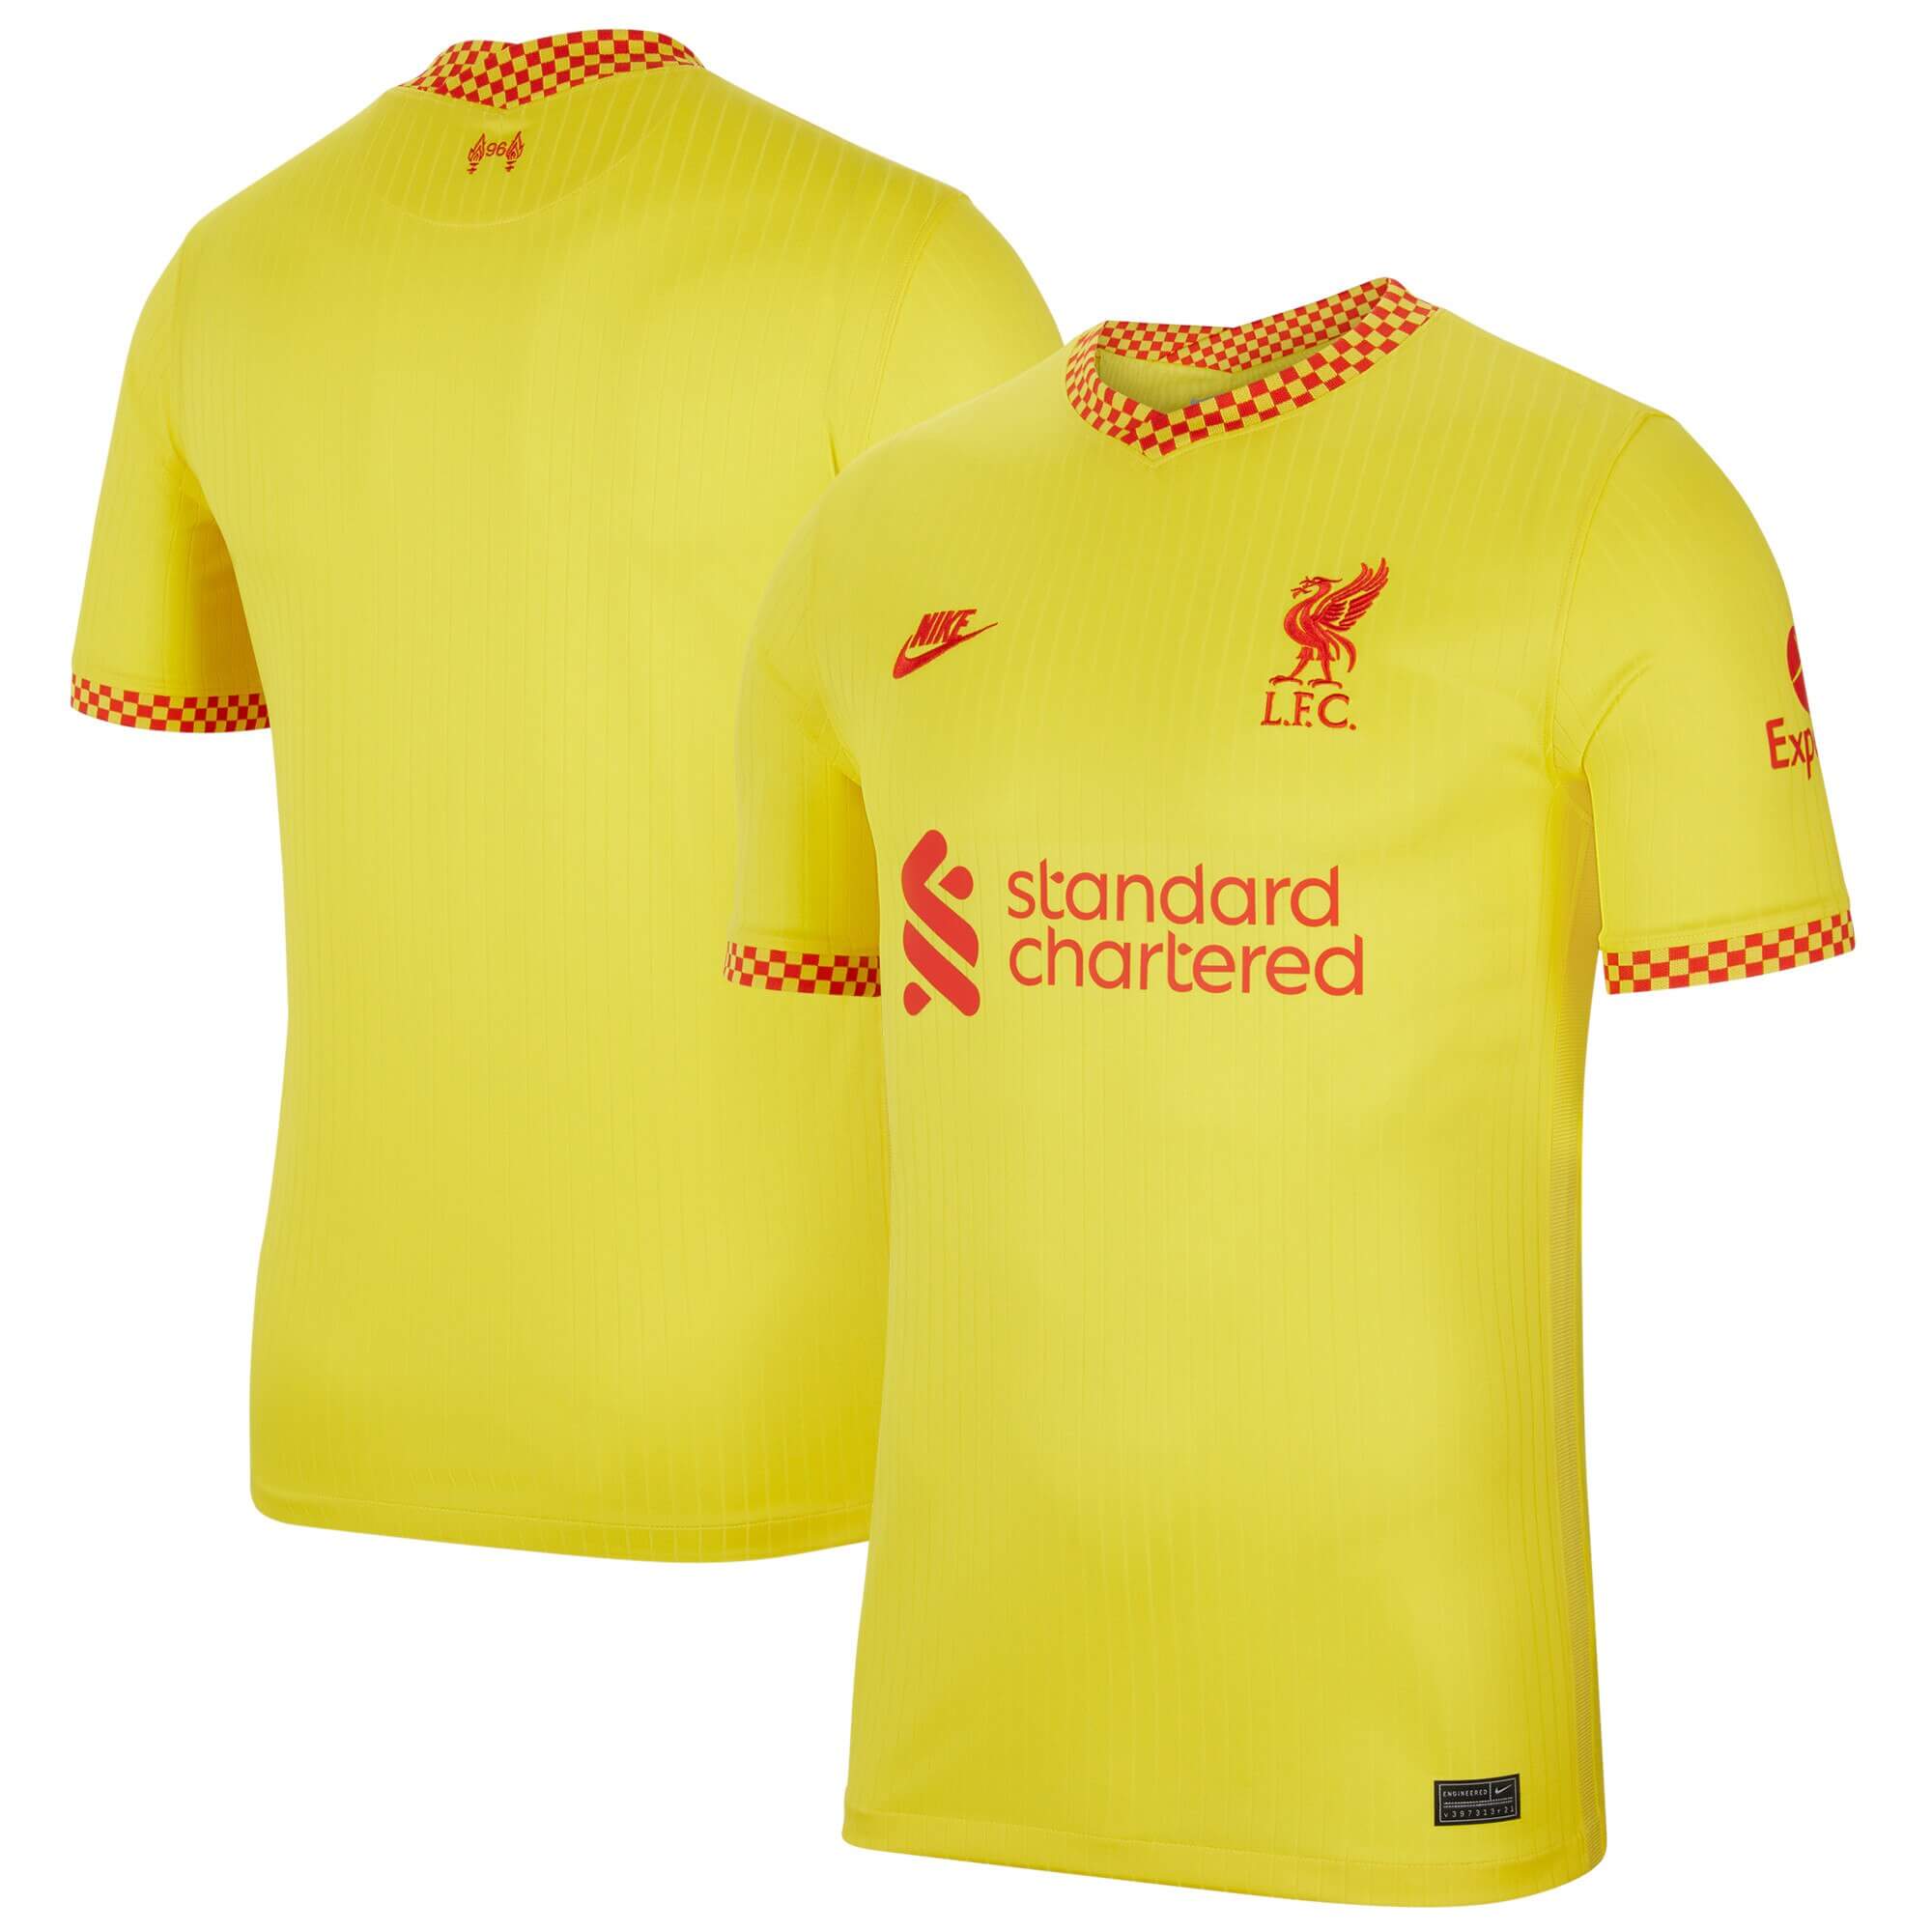 Adult Playing Uniforms Football Jerseys Liverpool F.C Standard Chartered 20/21 Home/Away Game Champions 19-20 Soccer Jerseys for Men Women Sportwear Boy Outfits 